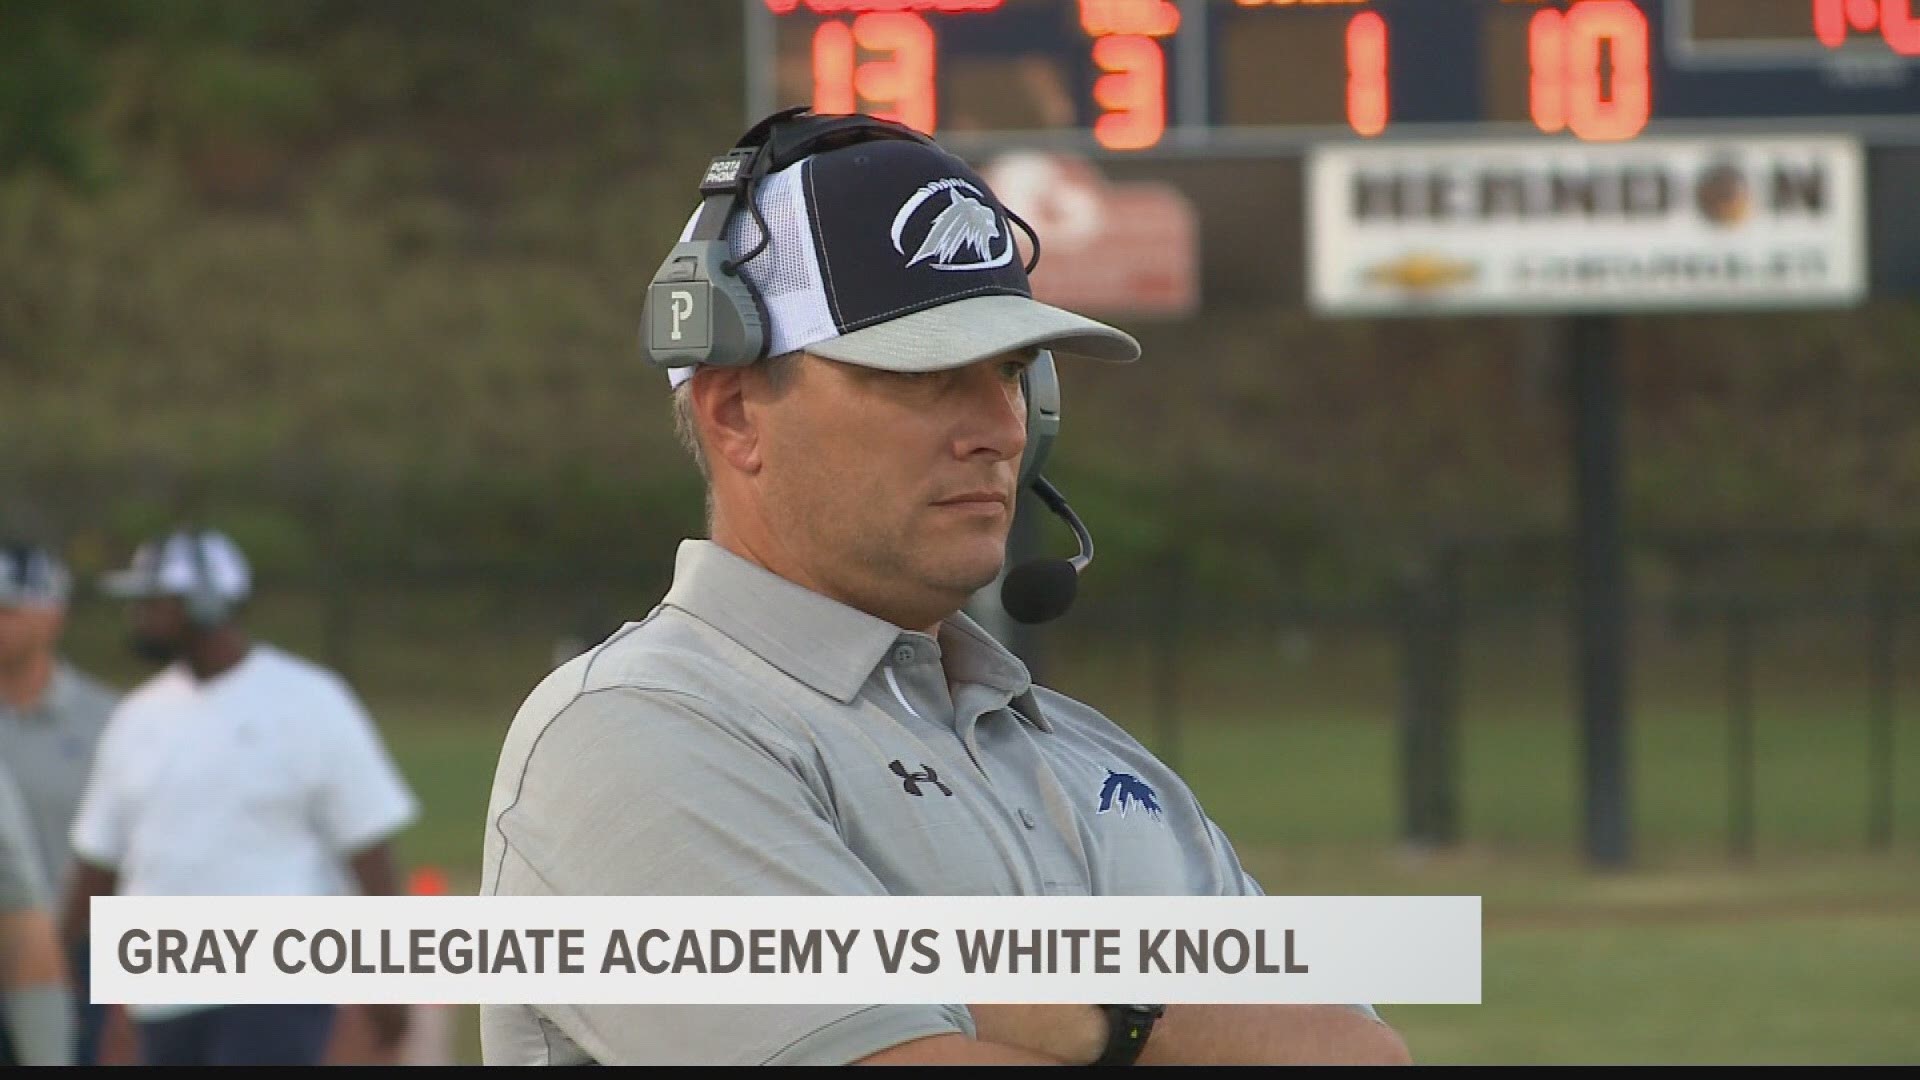 On a rare Wednesday night of high school football, White Knoll earned a 48-0 win over Gray Collegiate Academy.